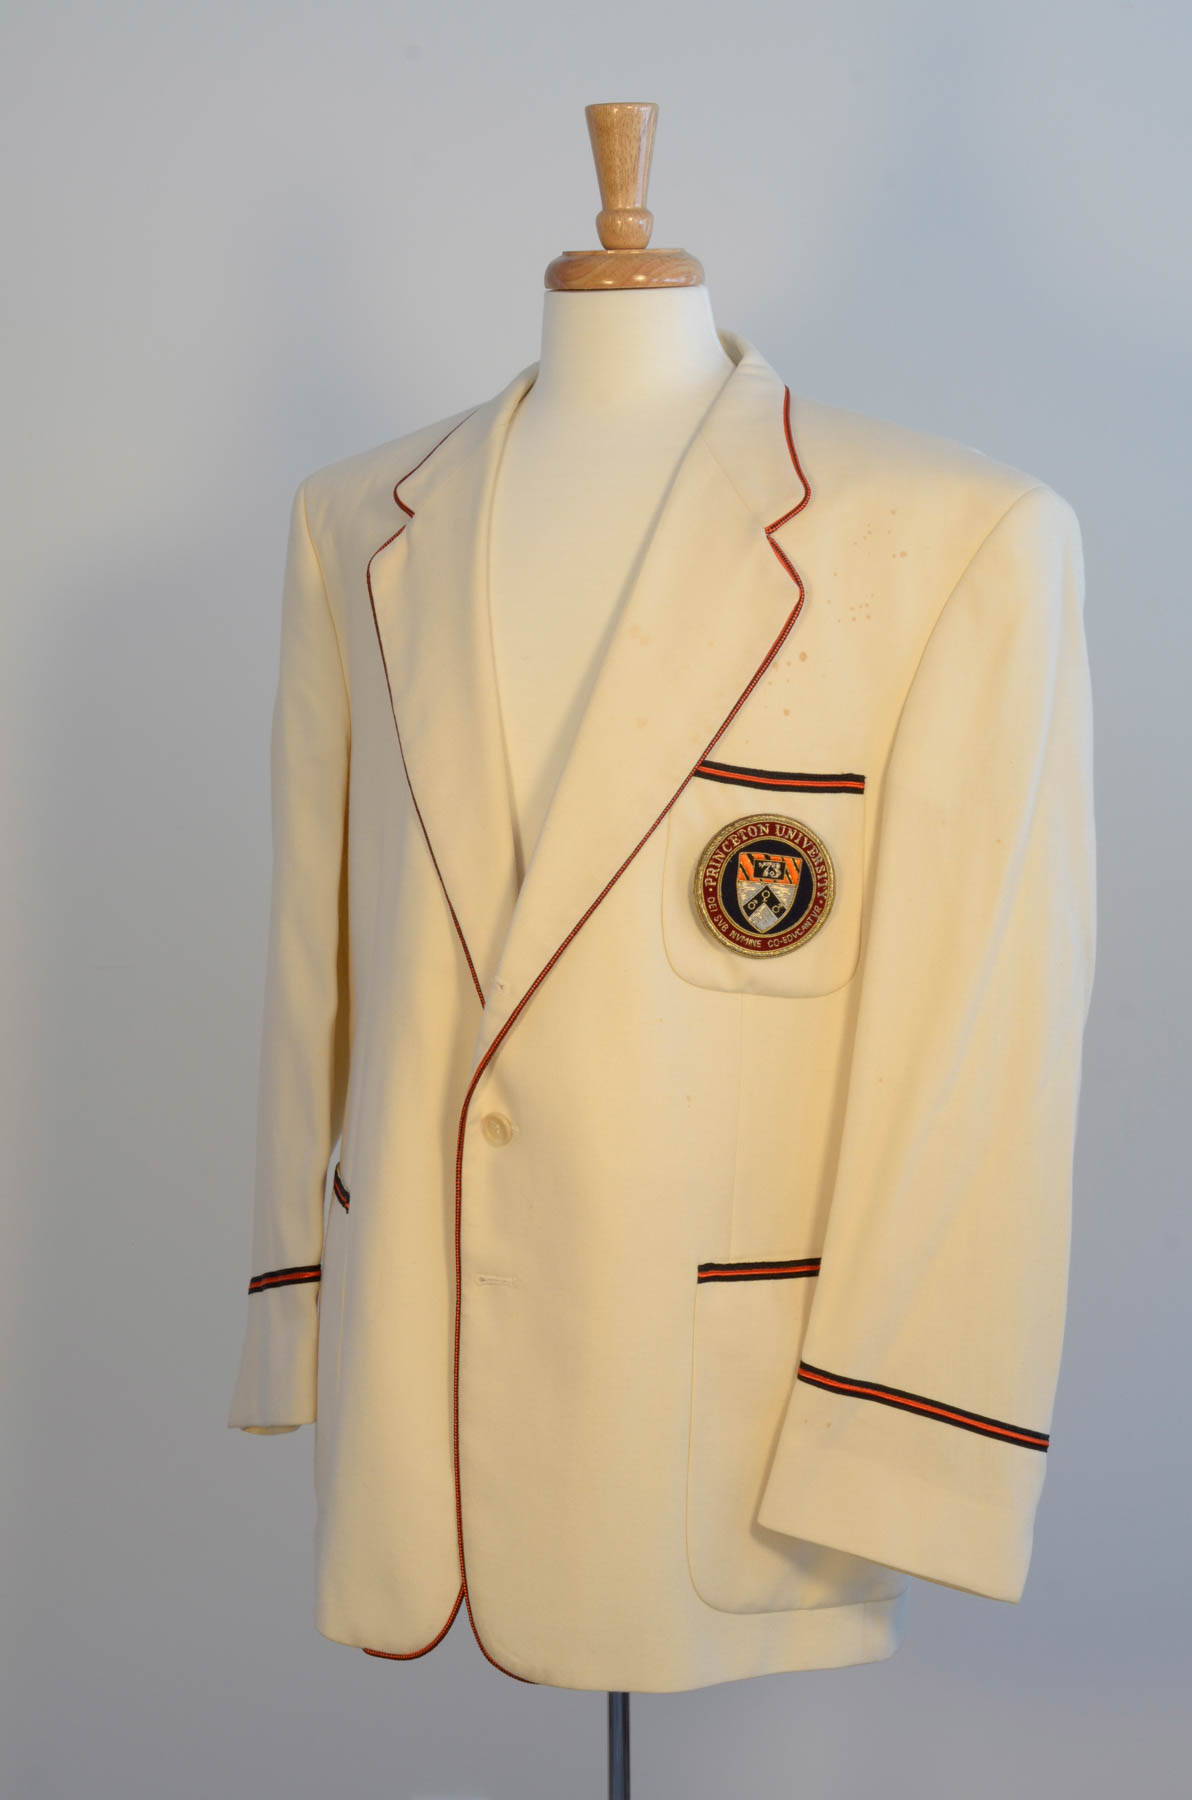 Reunion Jacket 1973 25th Front